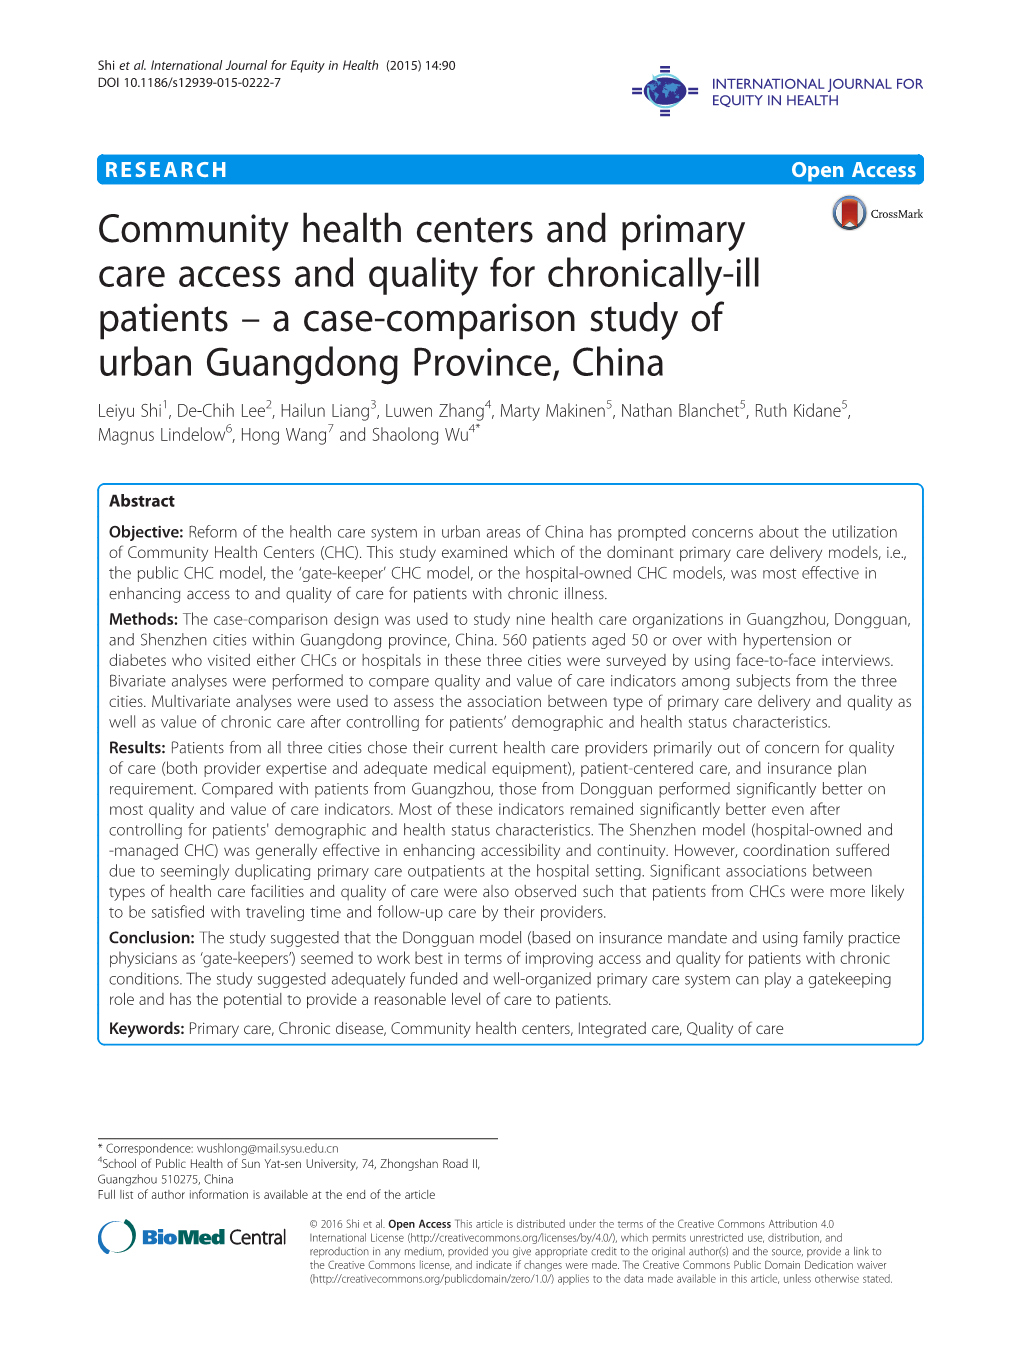 Community Health Centers and Primary Care Access and Quality For